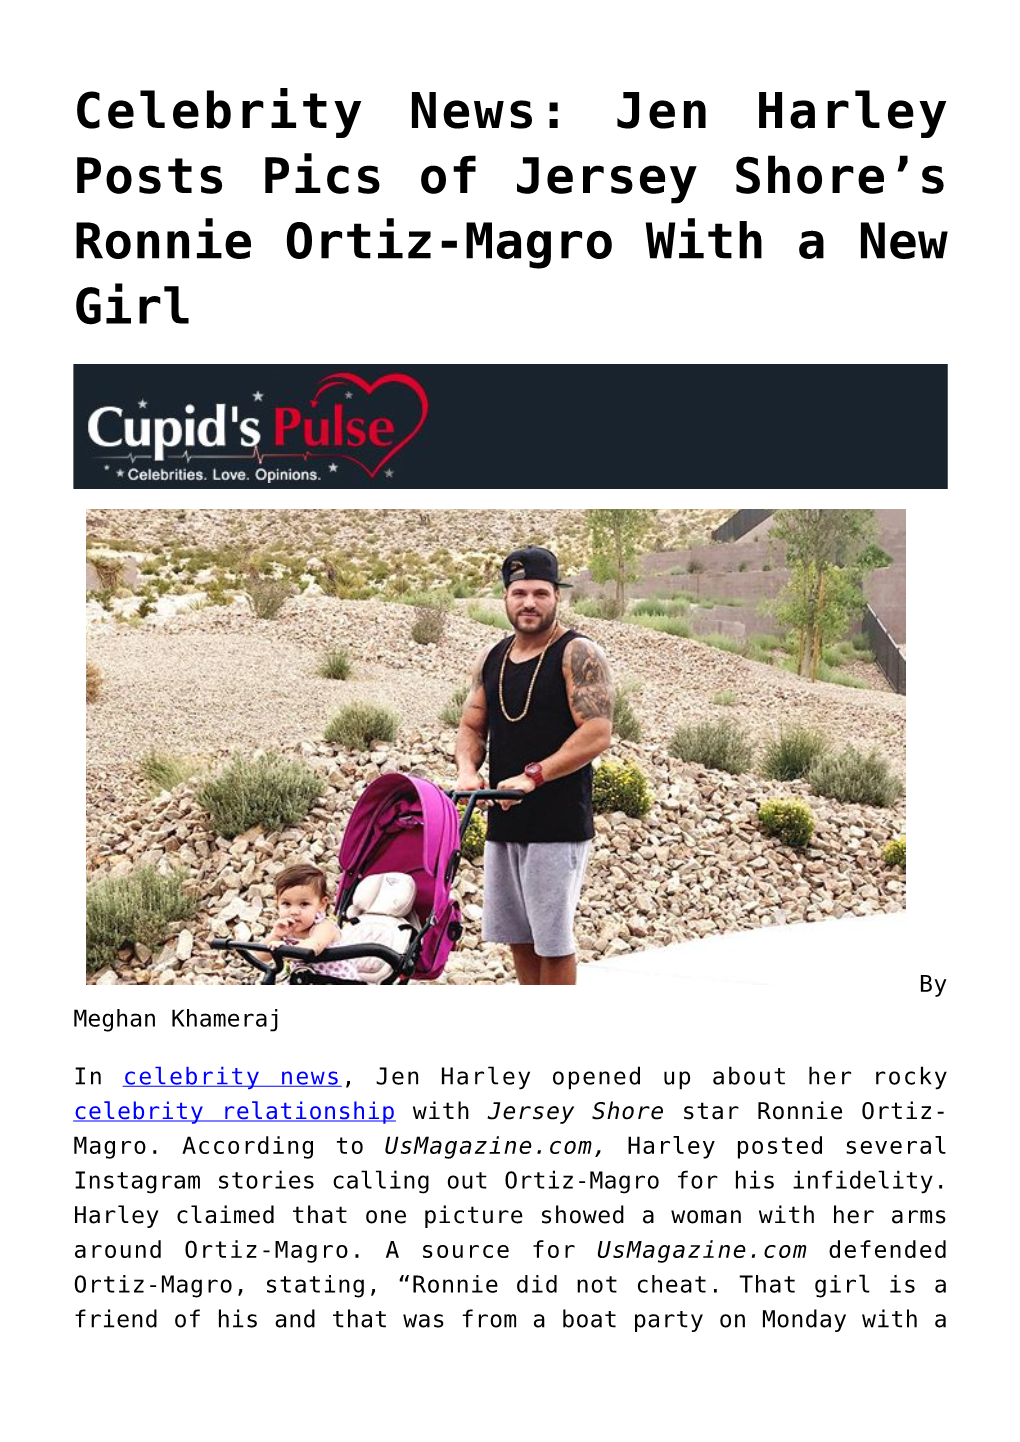 S Ronnie Ortiz-Magro with a New Girl